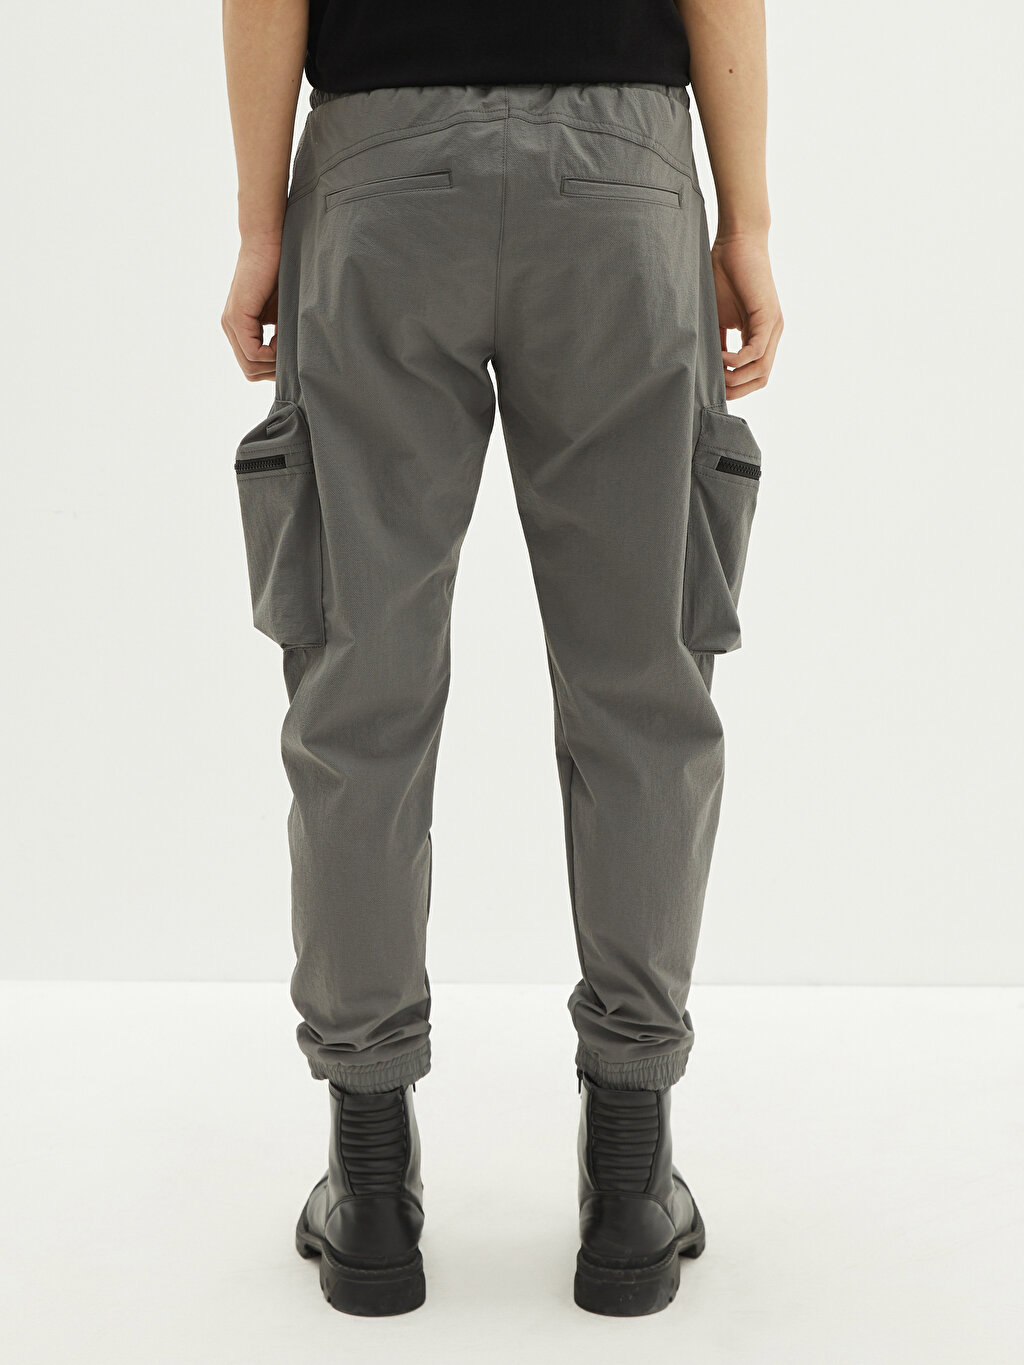 Regular Fit Men's Cargo Pants -W1ER22Z8-H0M - W1ER22Z8-H0M - LC 